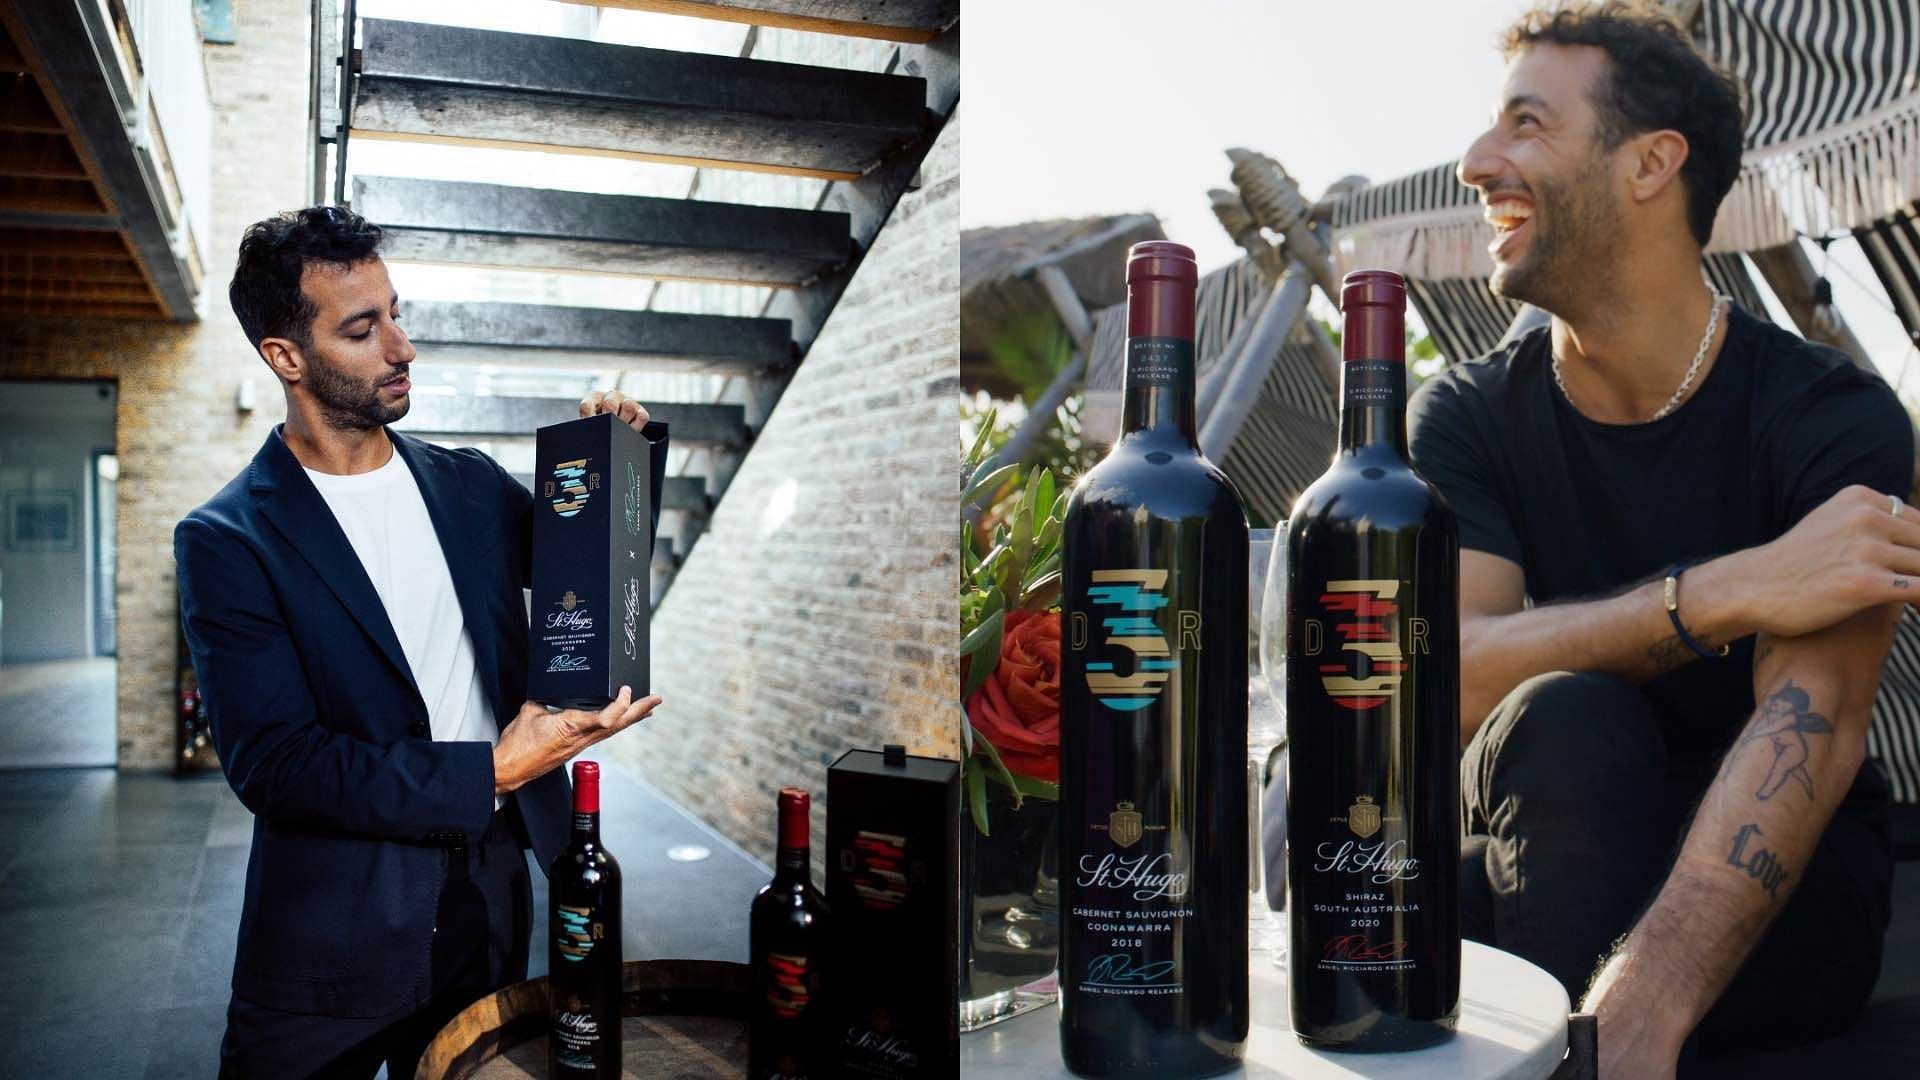 DR3 wine collection (Image via @sthugowines/ Instagram)